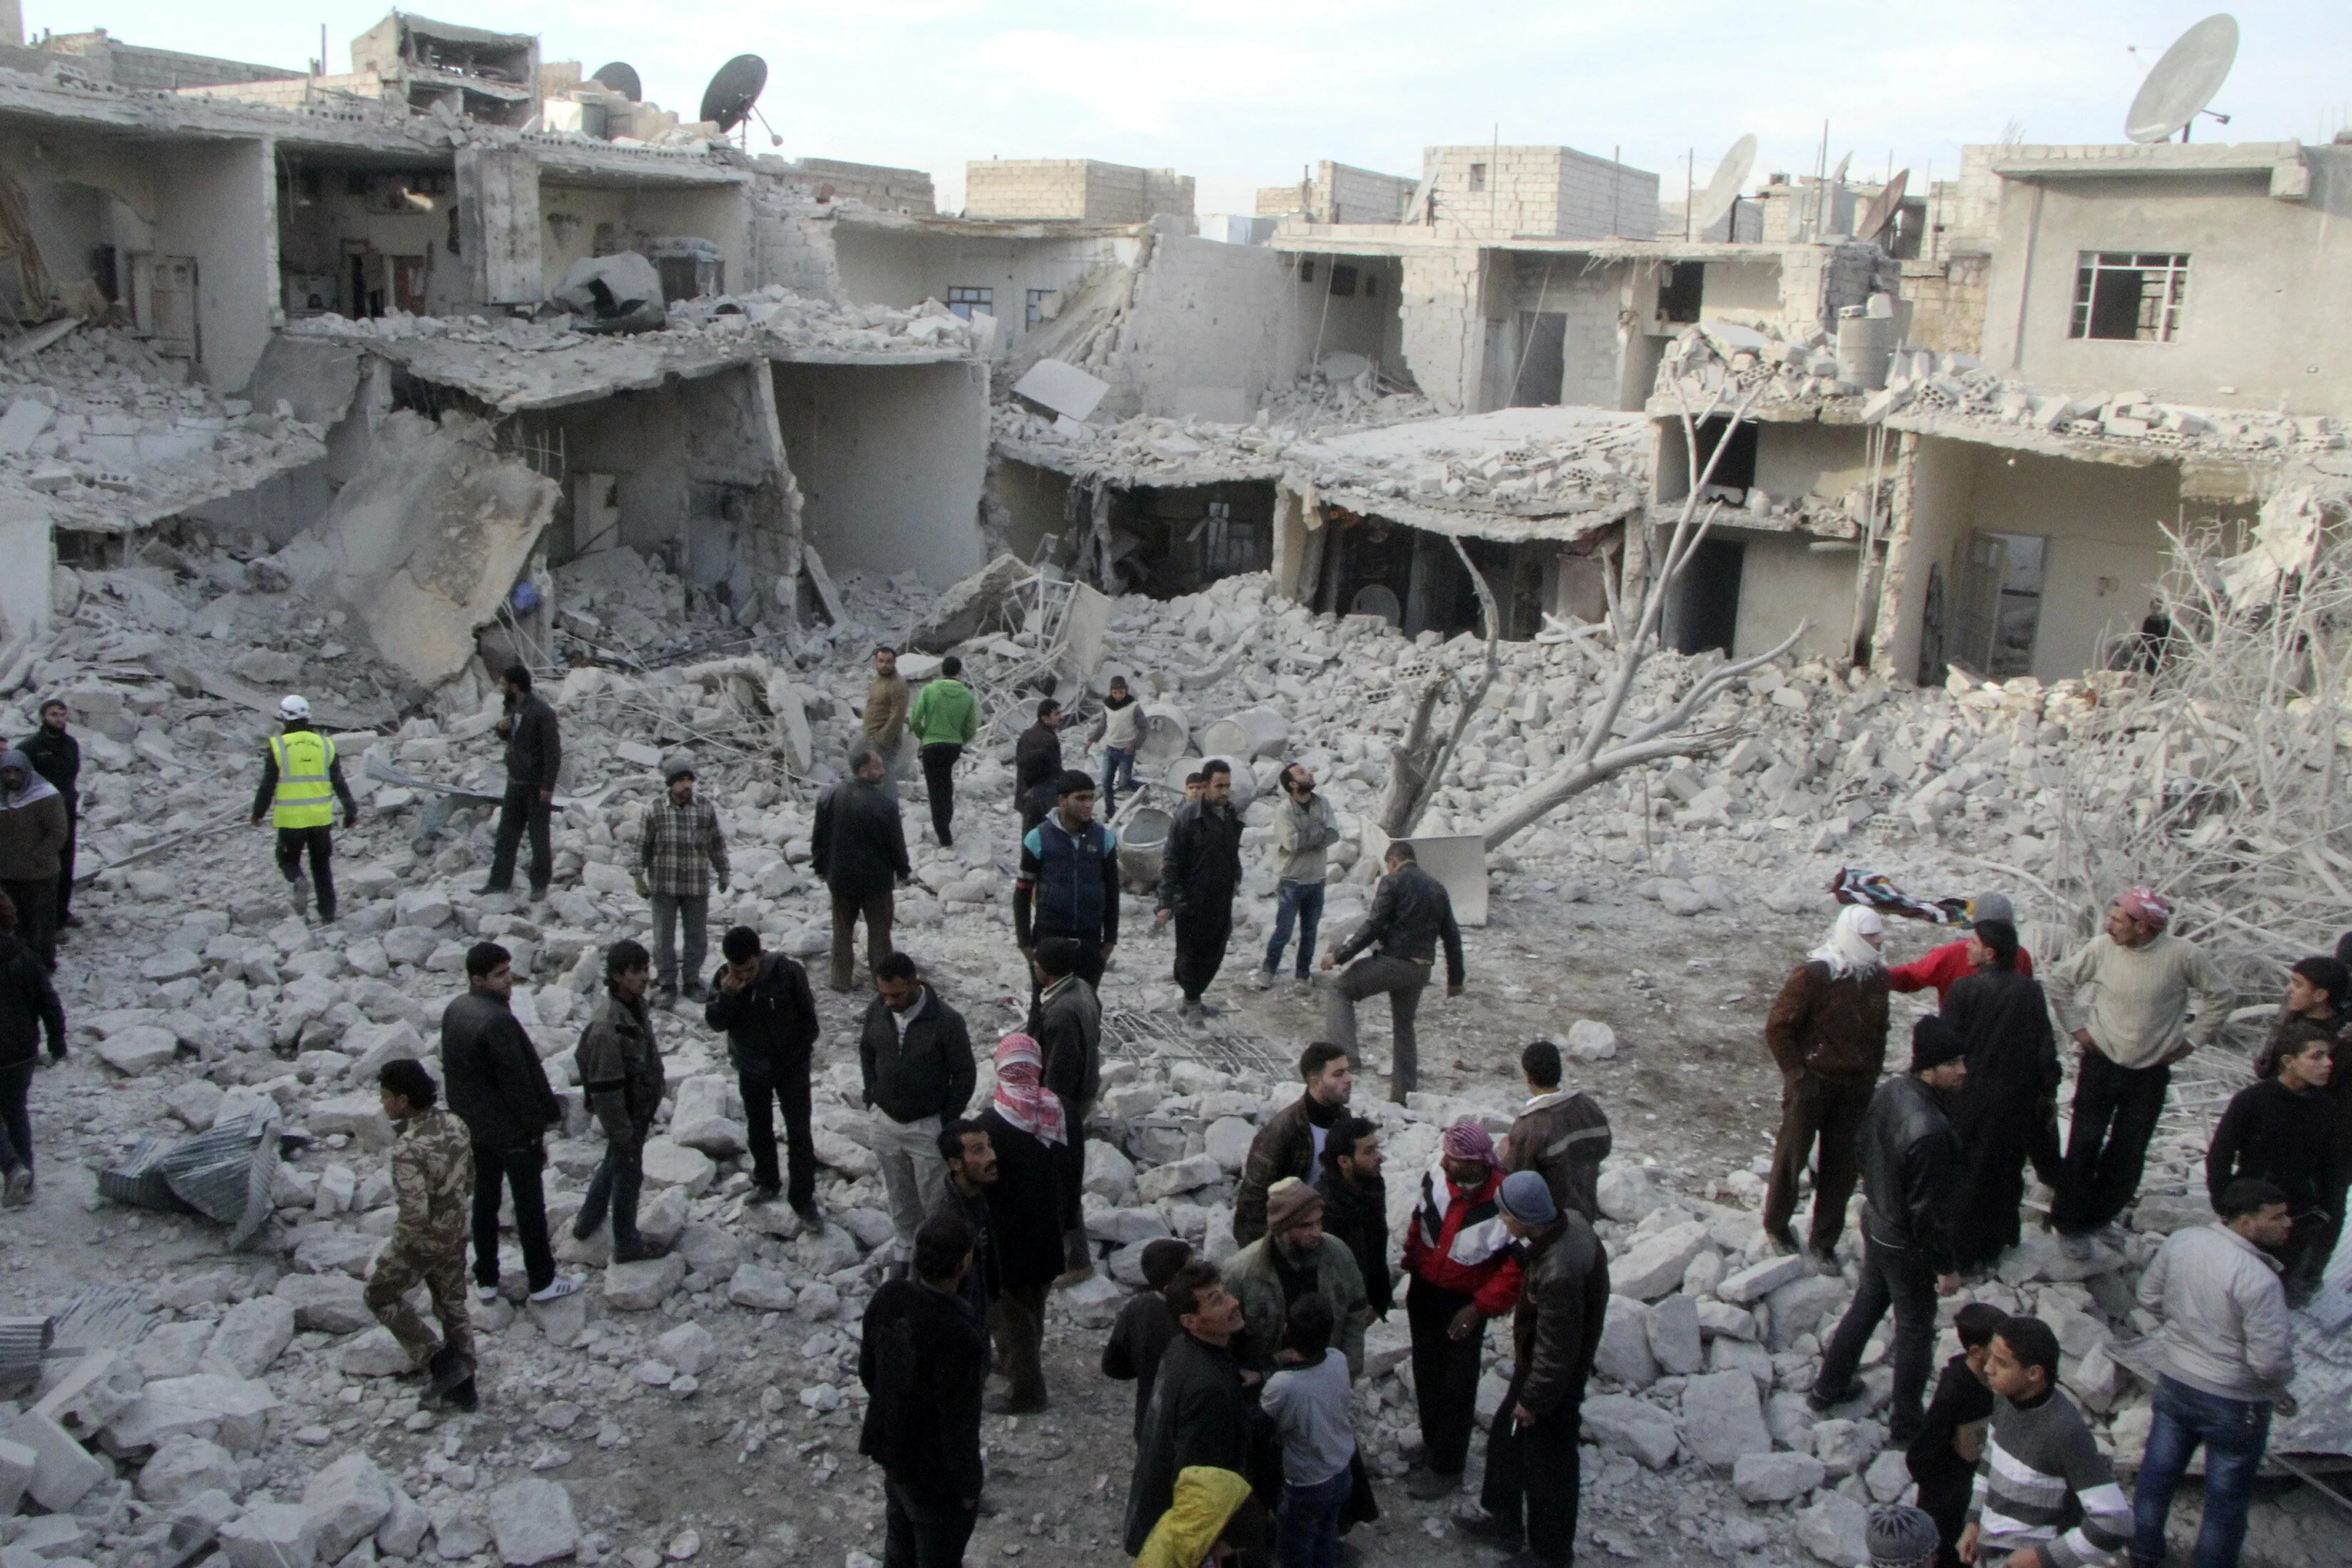 Residents search for survivors at a damaged site after what activists said was an air strike from forces loyal to Syria's President Bashar al-Assad in Tareek Al-Bab area of Aleppo, December 18, 2013. REUTERS/Saad Abobrahim (SYRIA - Tags: POLITICS CIVIL UNREST) - RTX16NKQ